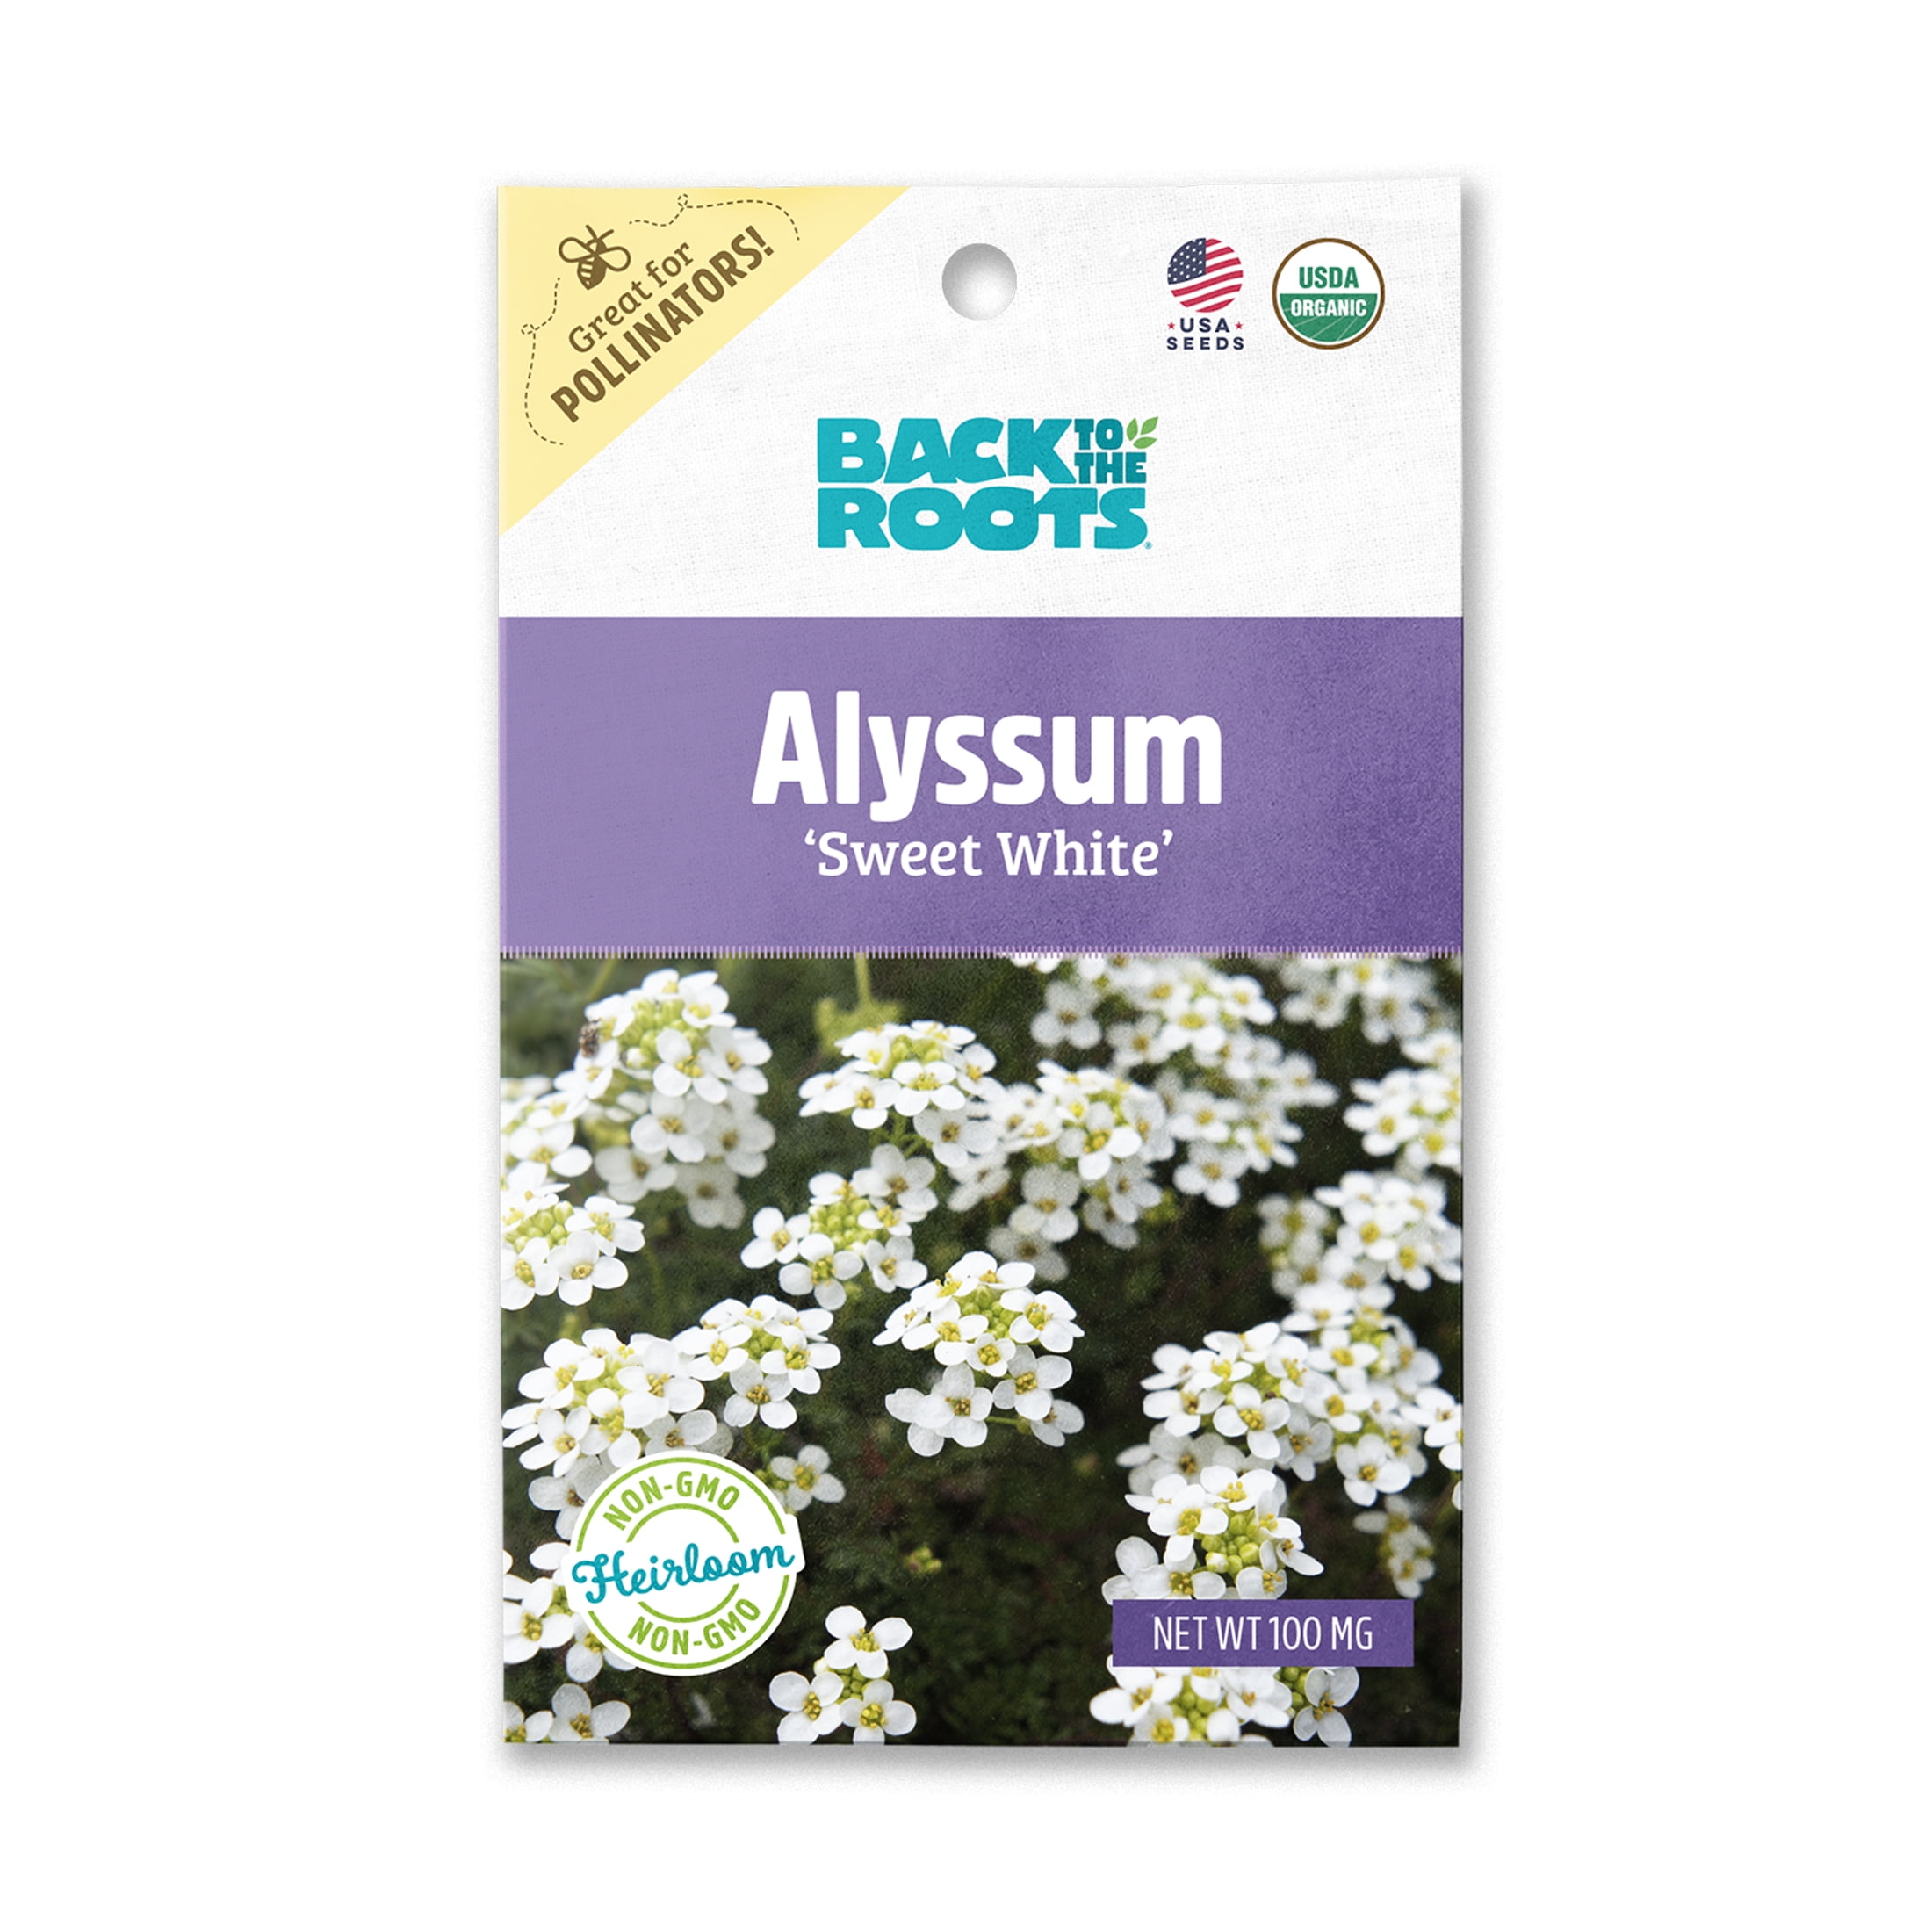 Back to the Roots Organic Sweet White Alyssum Flower Seeds, 1 Packet